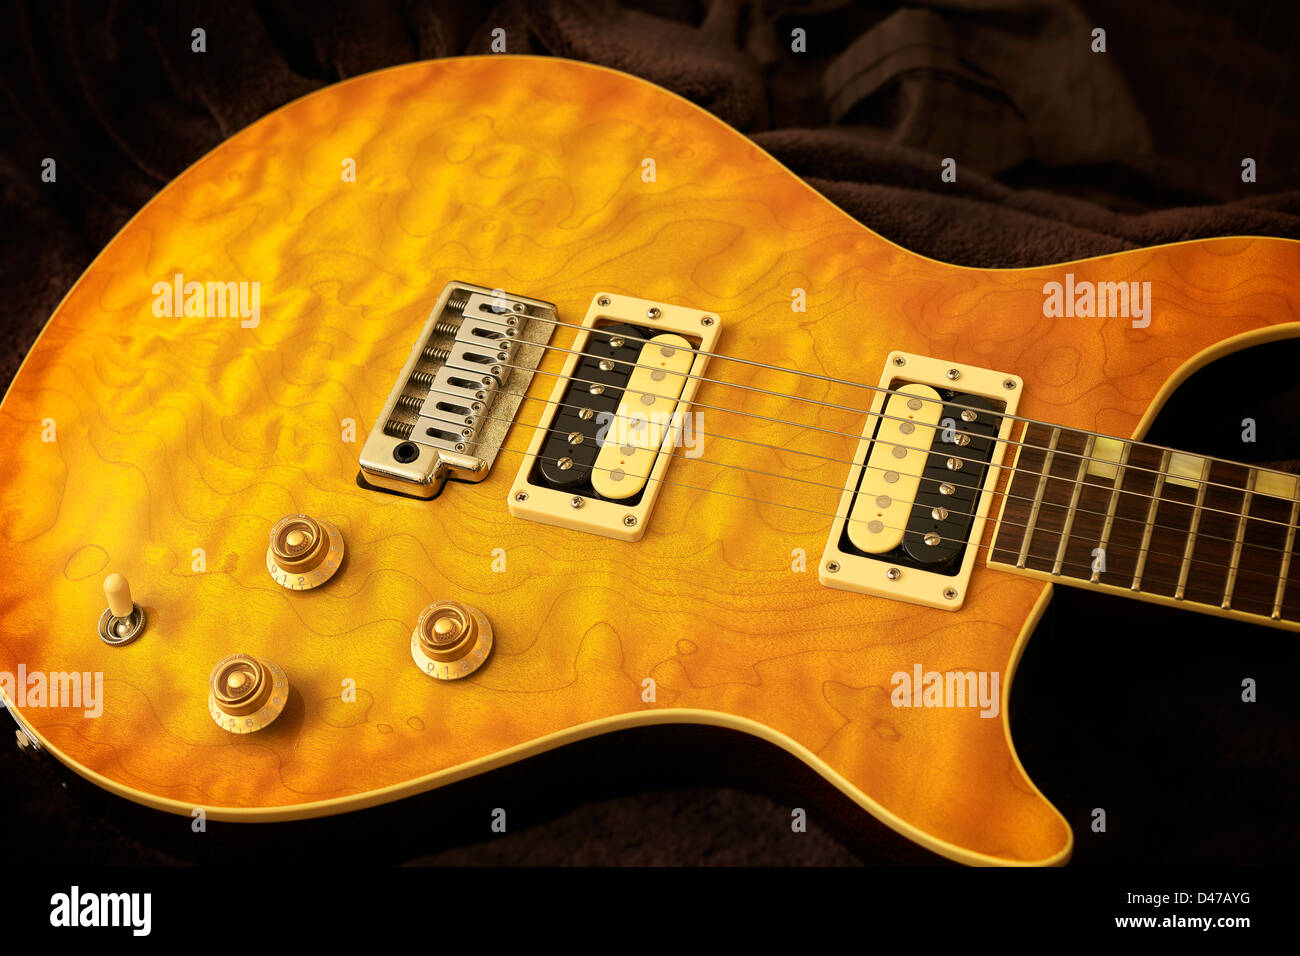 A finely figured, quilted maple guitar top. Stock Photo